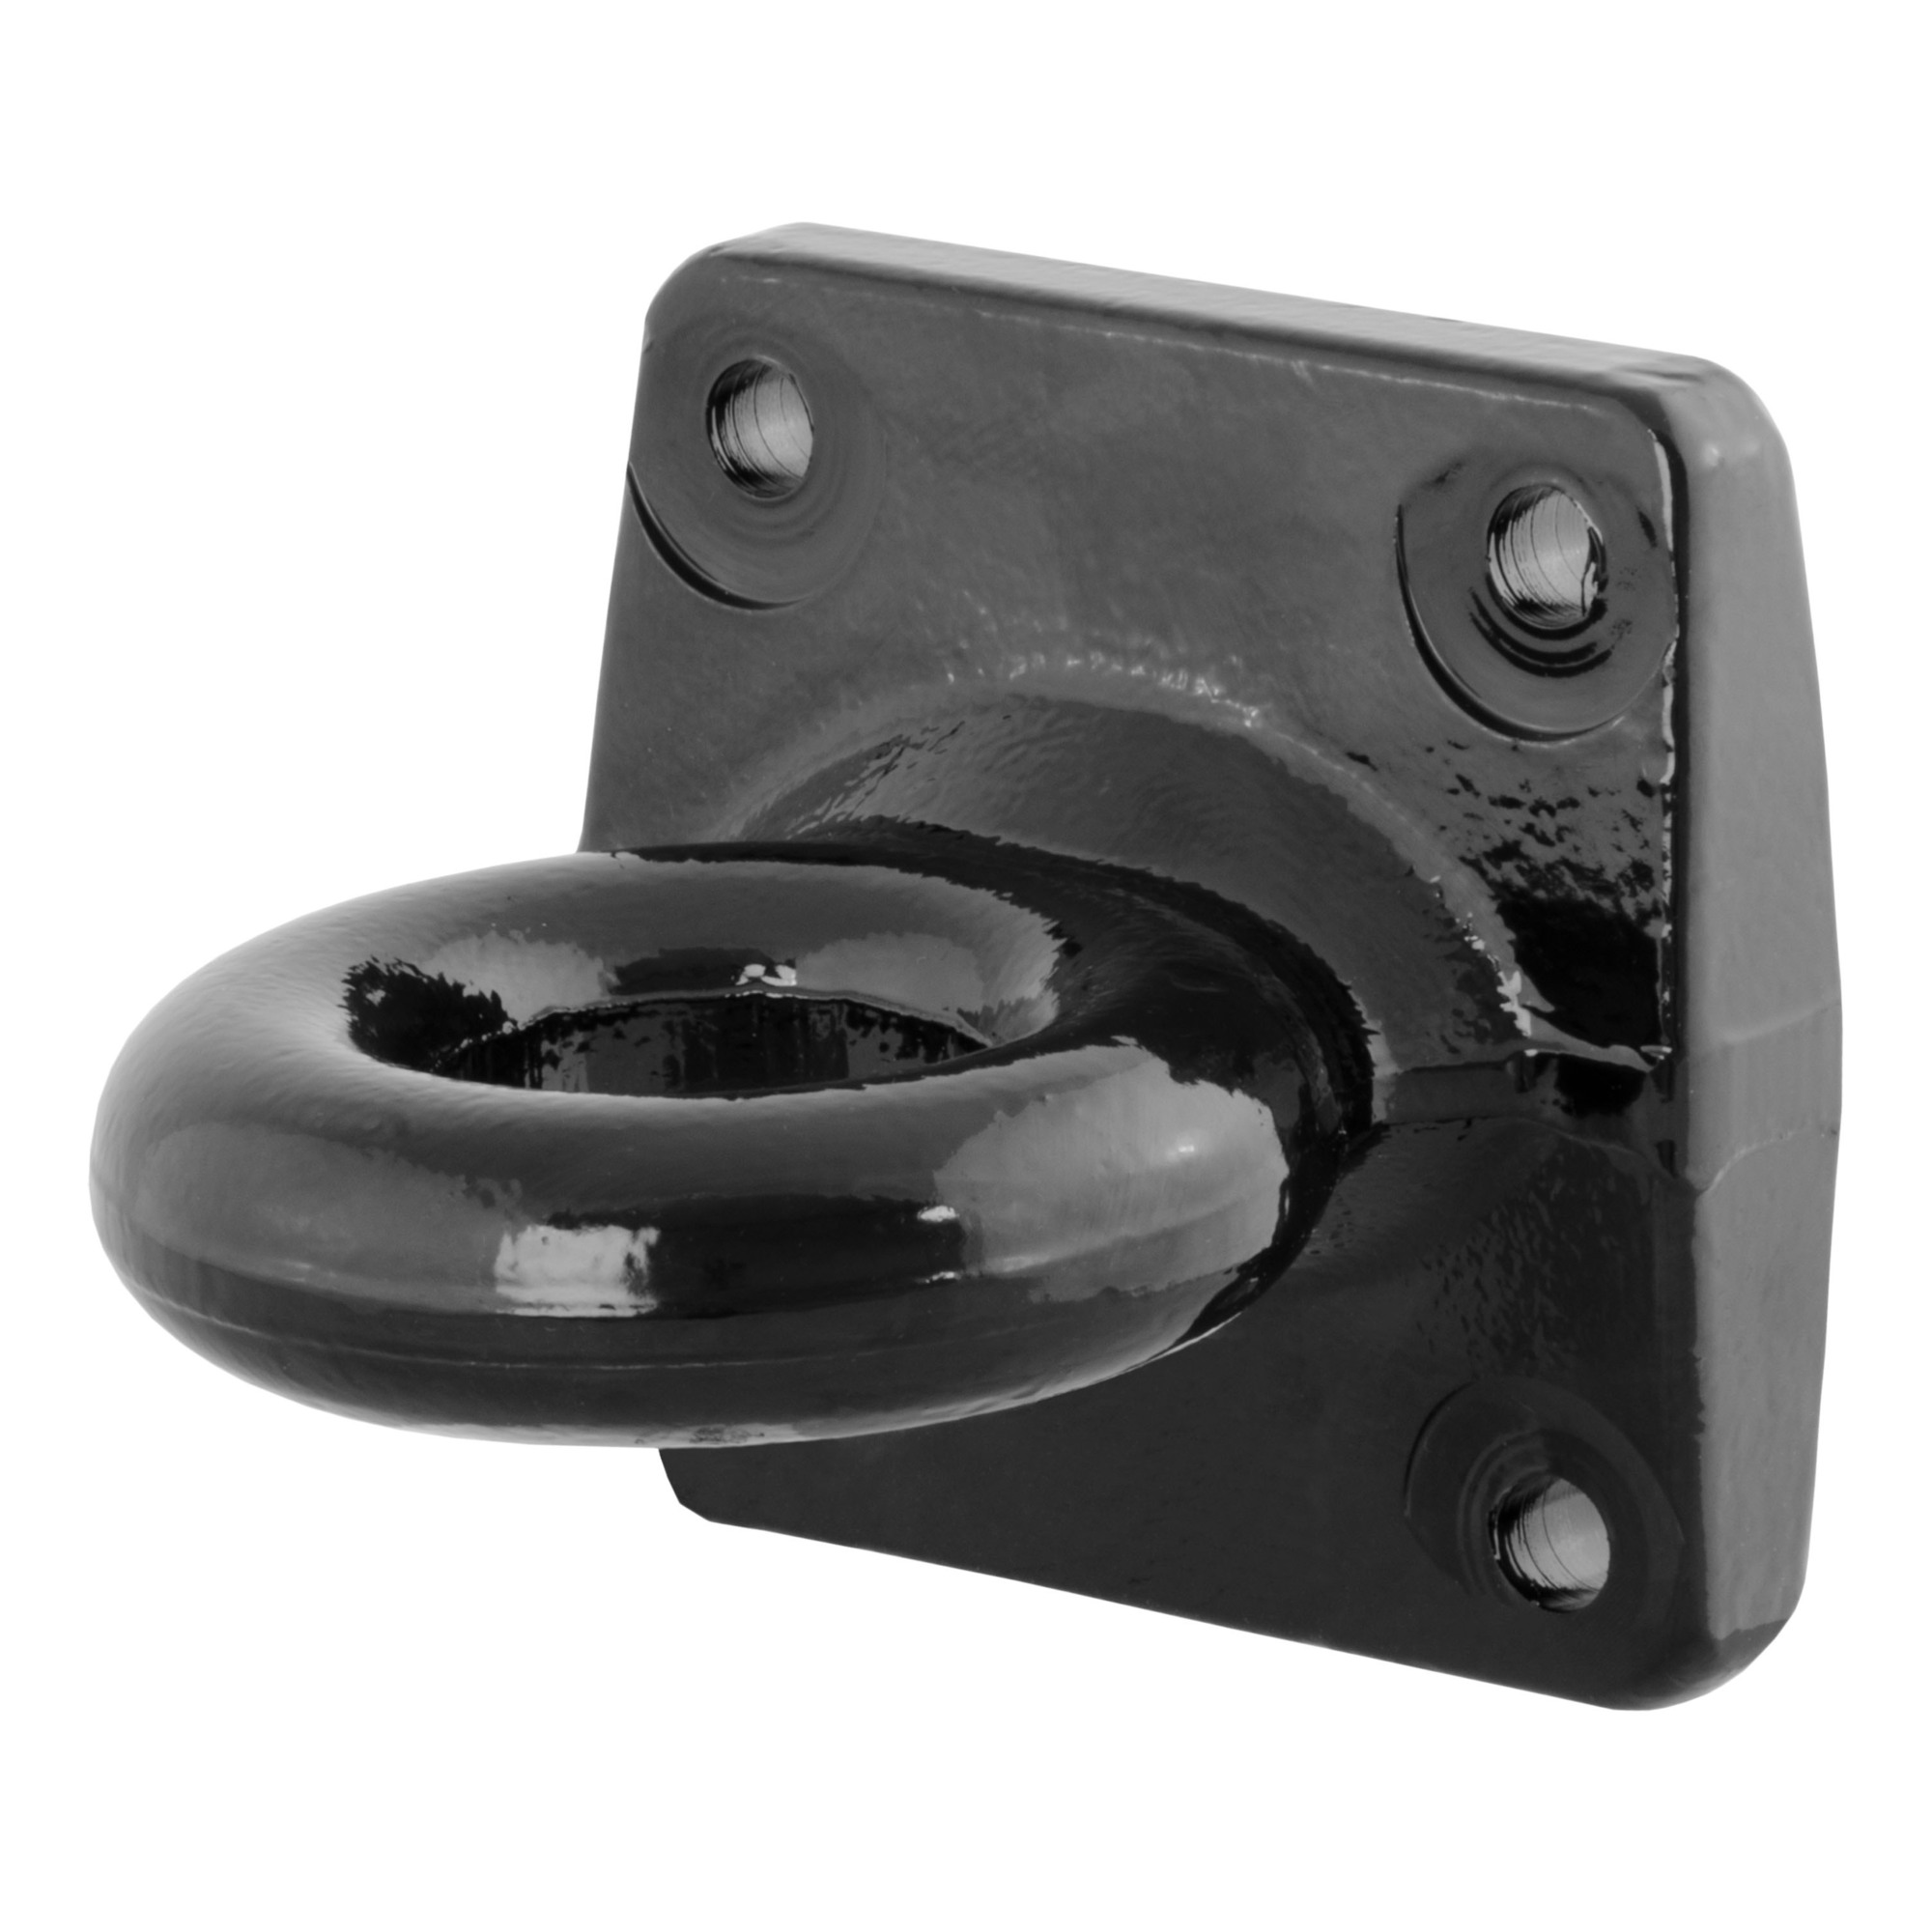 Curt Manufacturing, Pintle Mount Lunette Eye, Material Combination, Model 48550